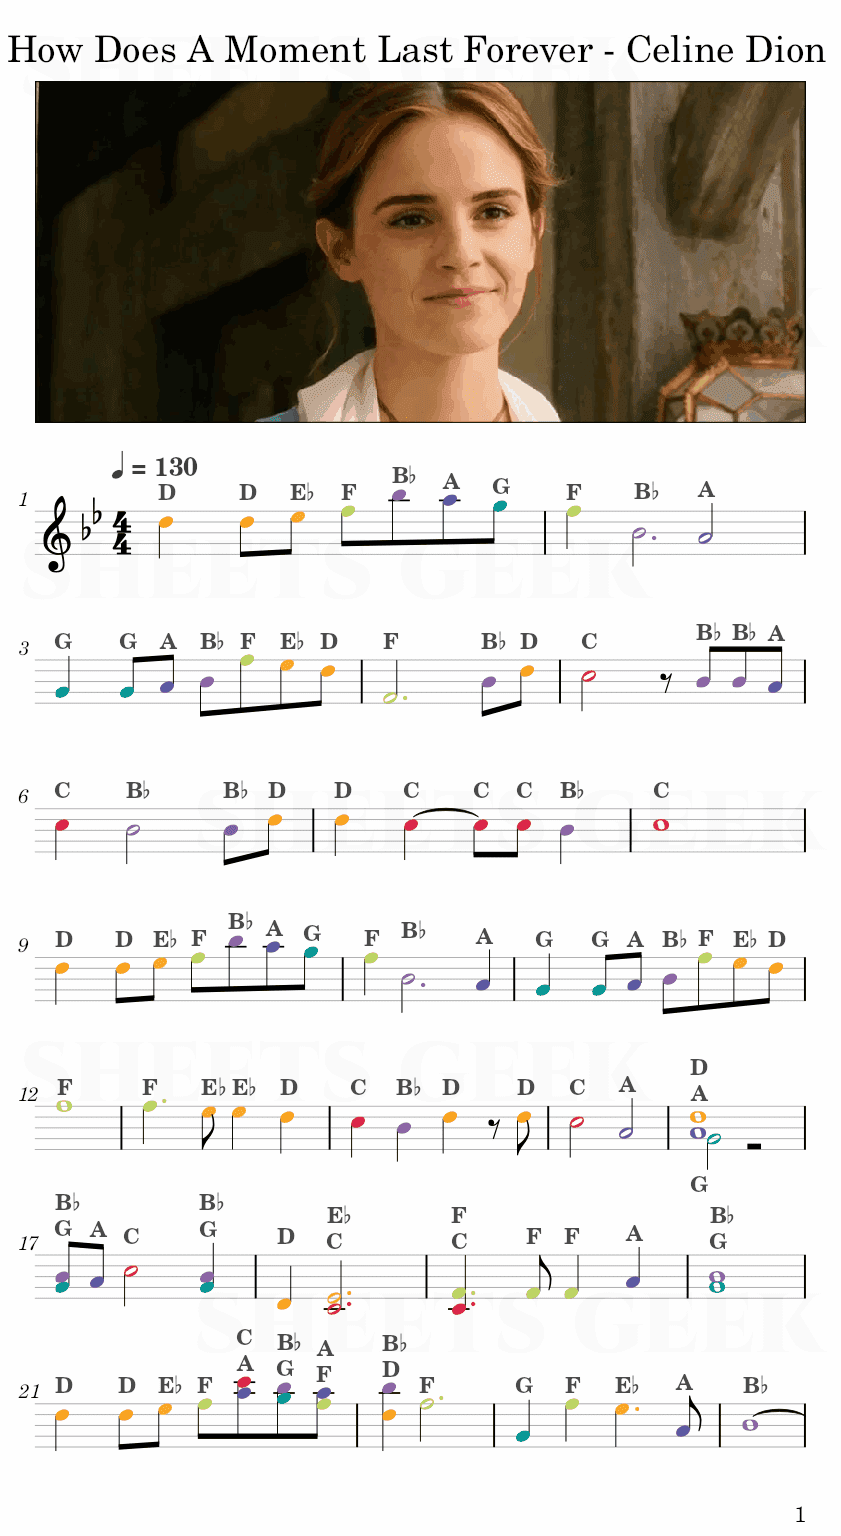 How Does A Moment Last Forever - Celine Dion (Beauty and the Beast) Easy Sheet Music Free for piano, keyboard, flute, violin, sax, cello page 1